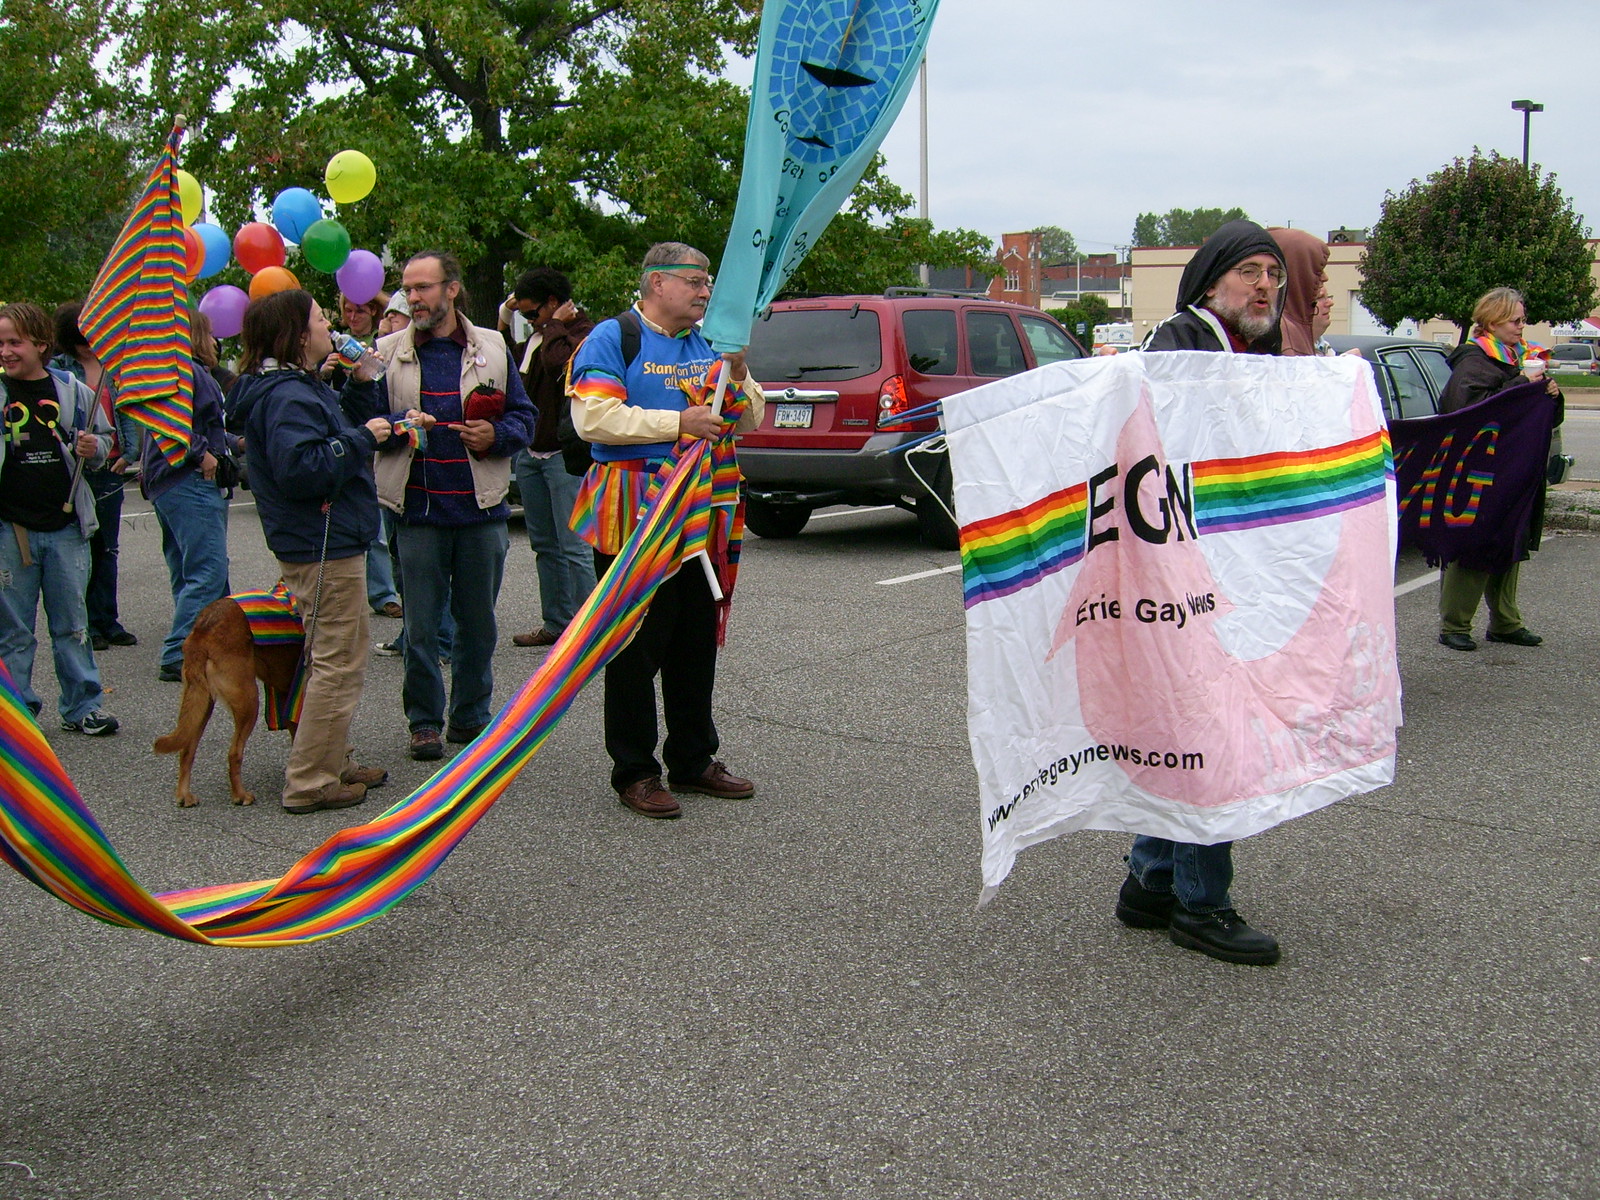 Erie Gay News, PFLAG, and Unitarian-Universalist banners